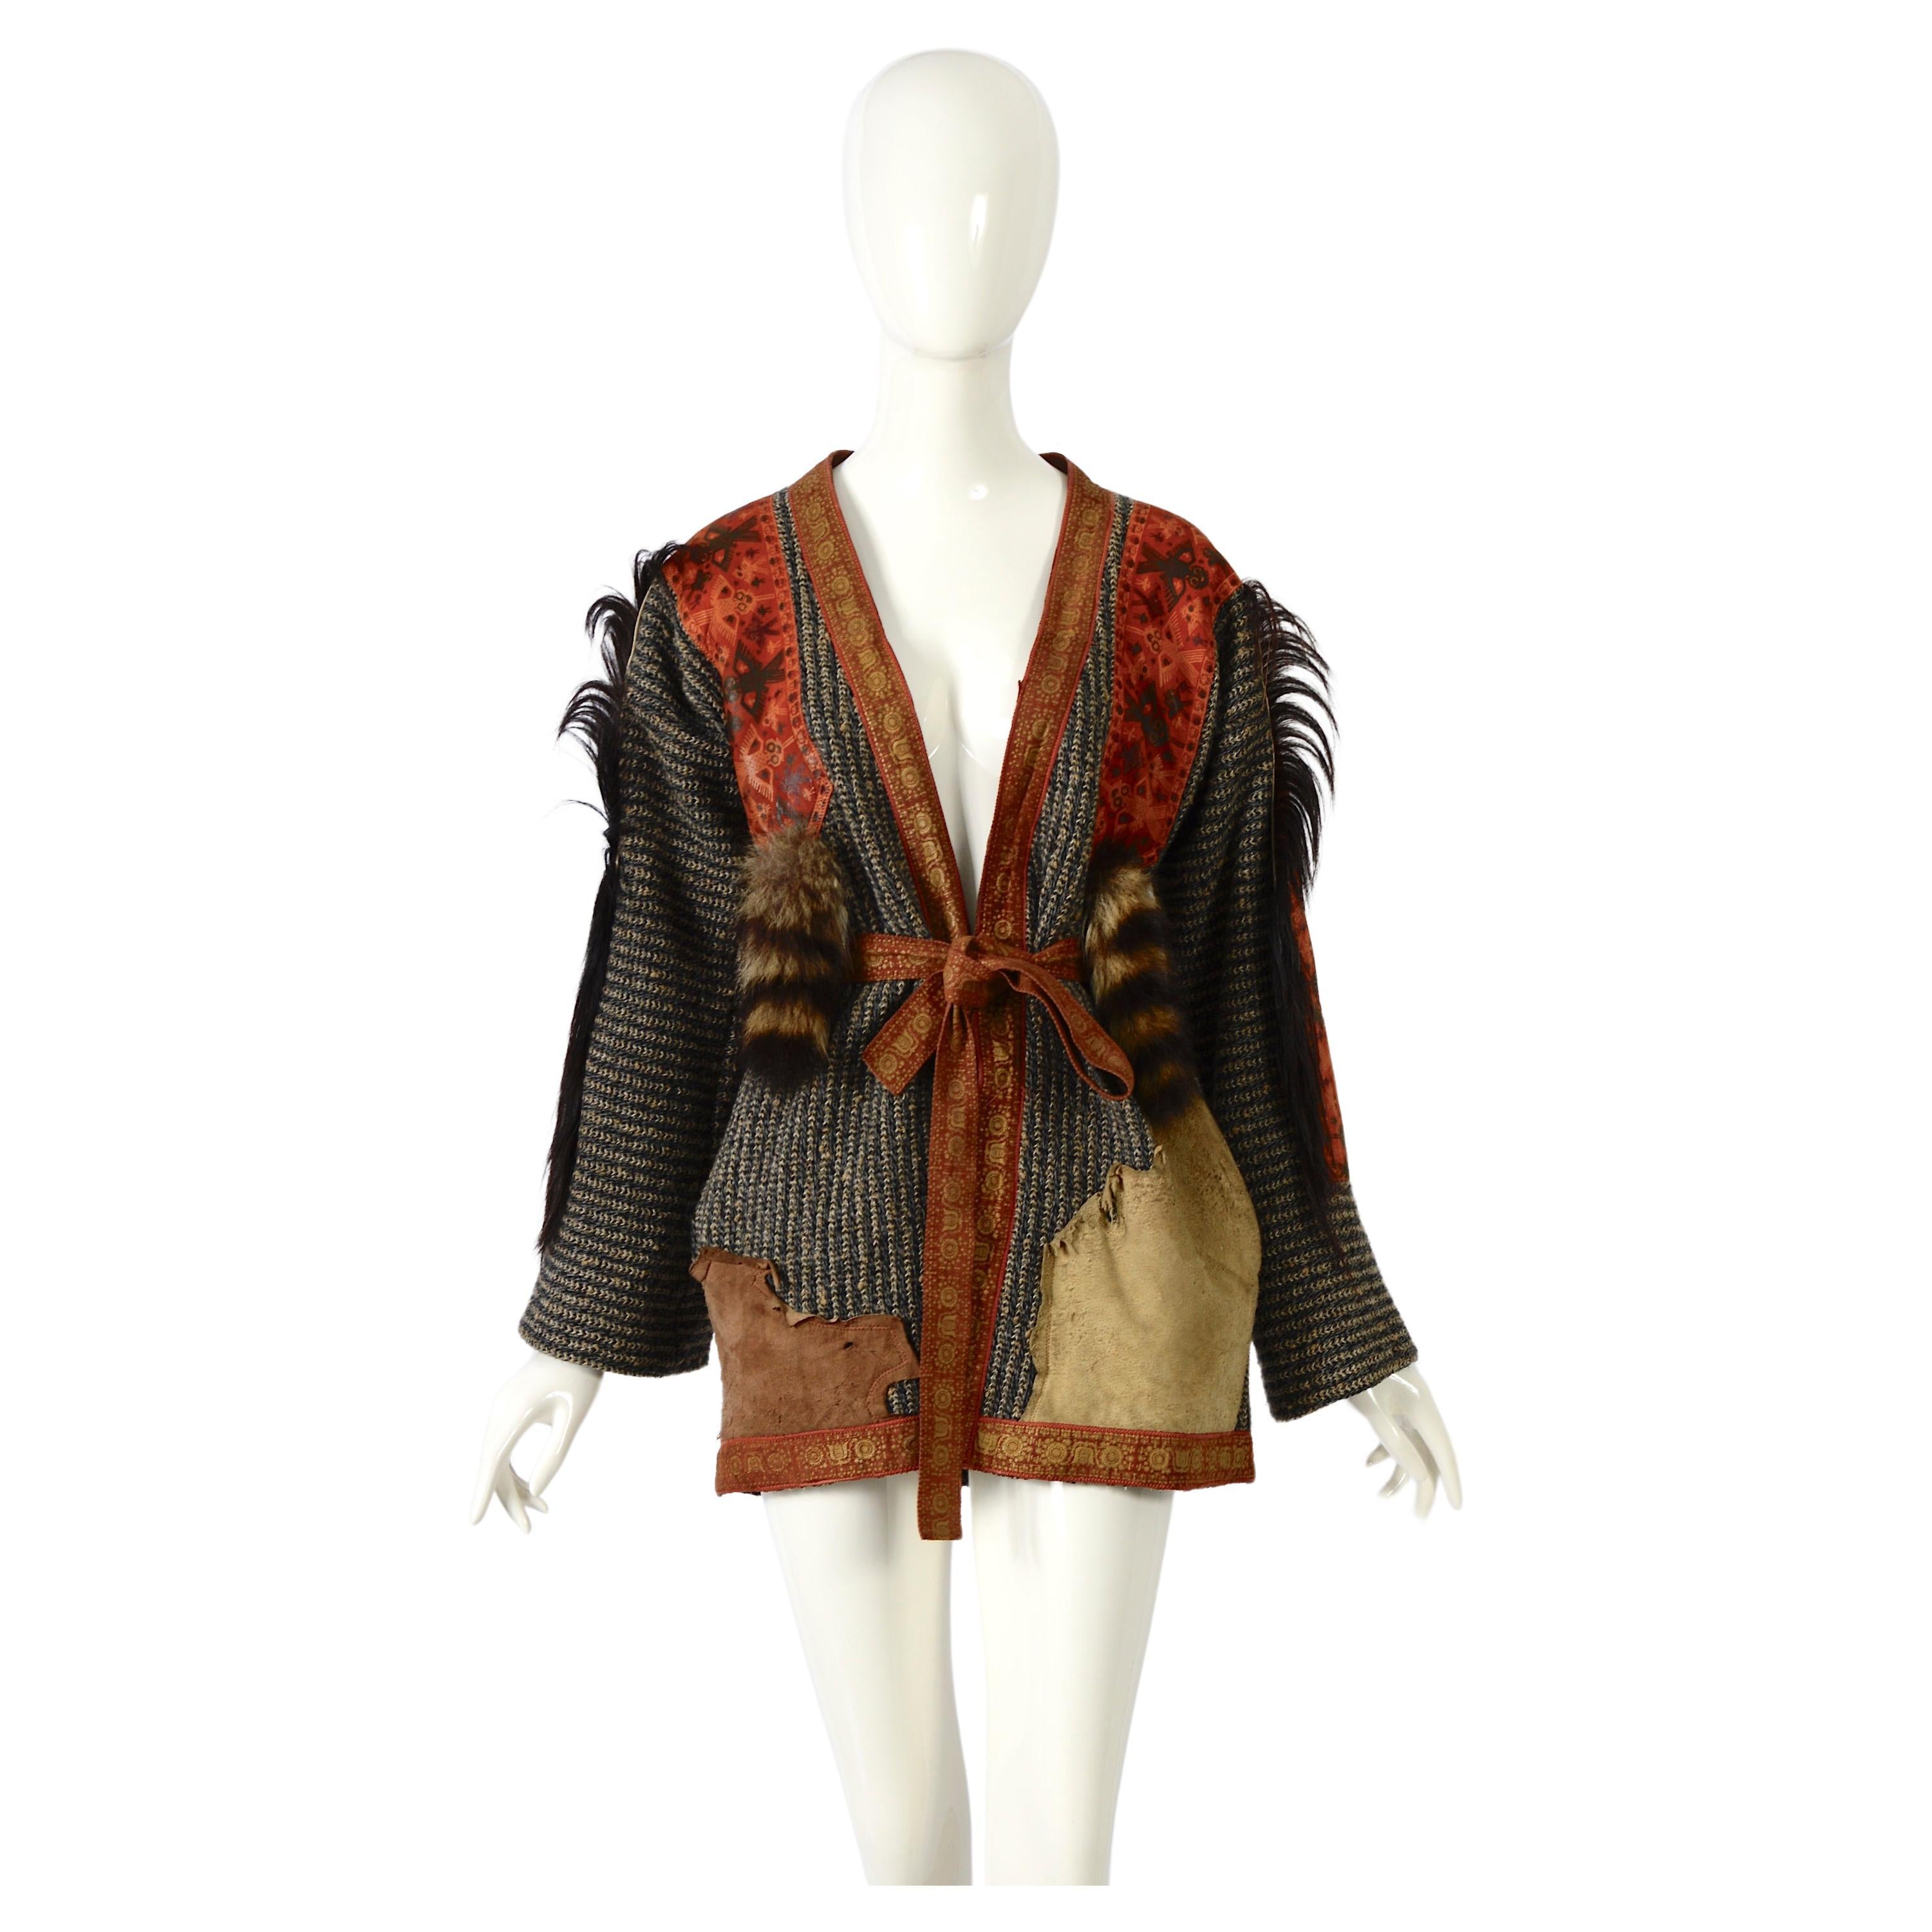 Roberto Cavalli Museum-Worthy 1971 Patchwork Debut Collection Vintage Jacket  For Sale